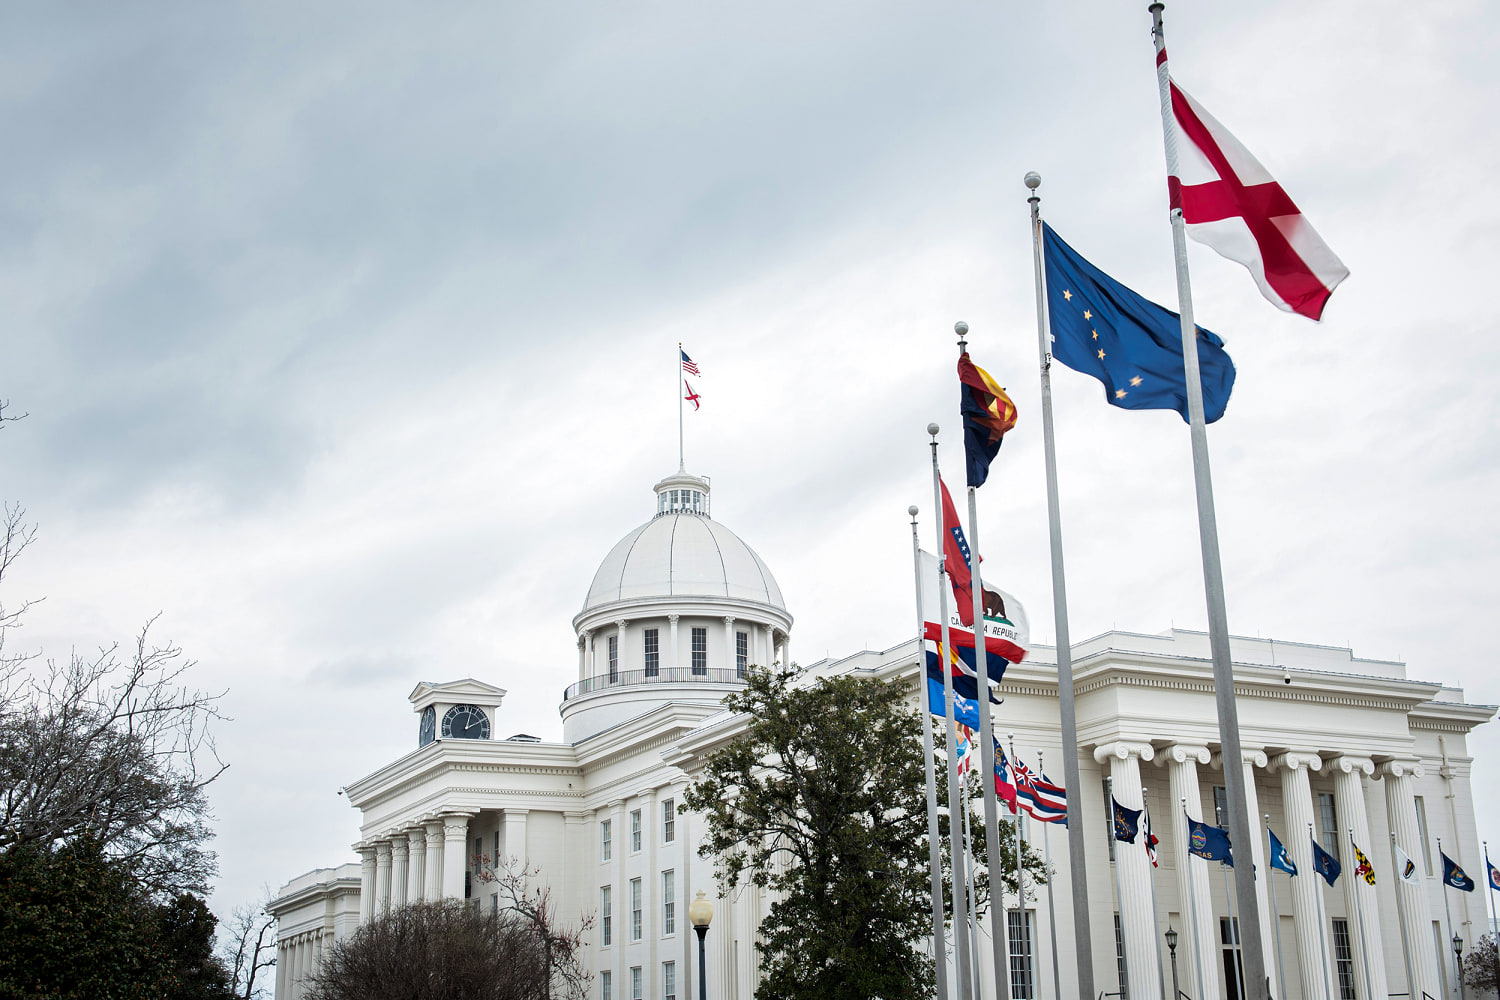 Alabama Republicans pledged to revisit IVF in hopes of a long-term fix. They never did.